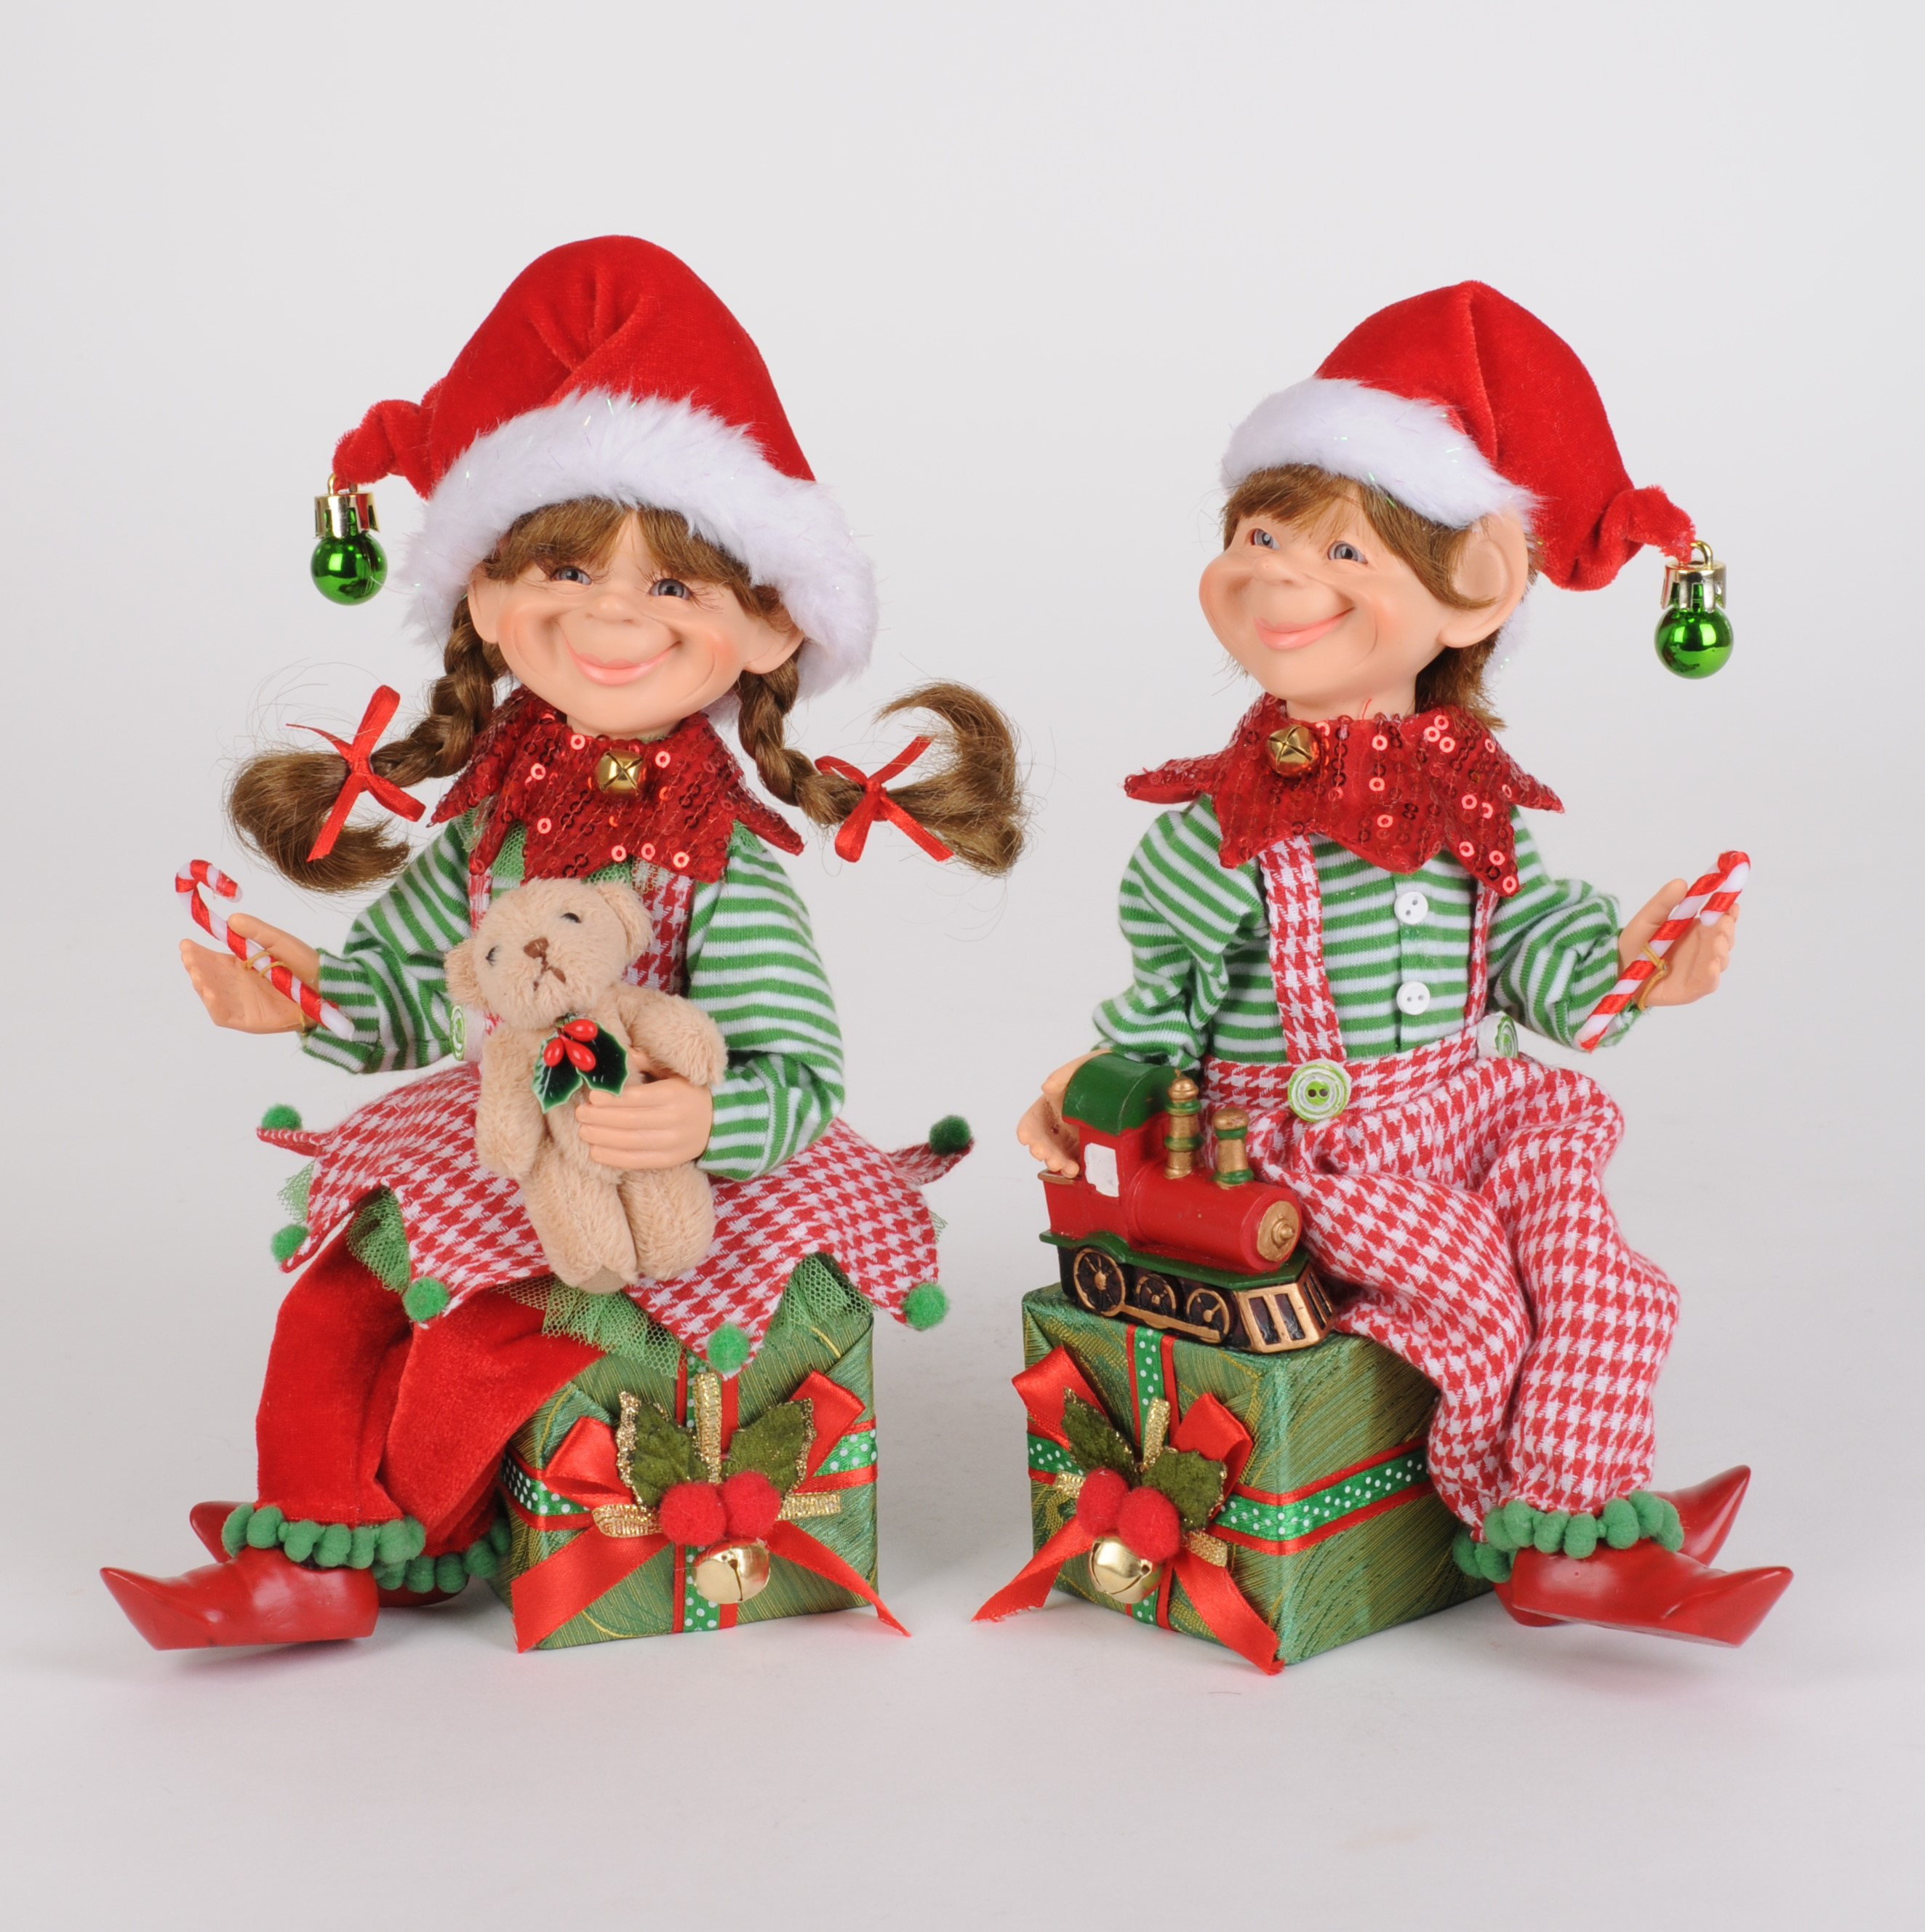 Elf Figurines and Collectibles